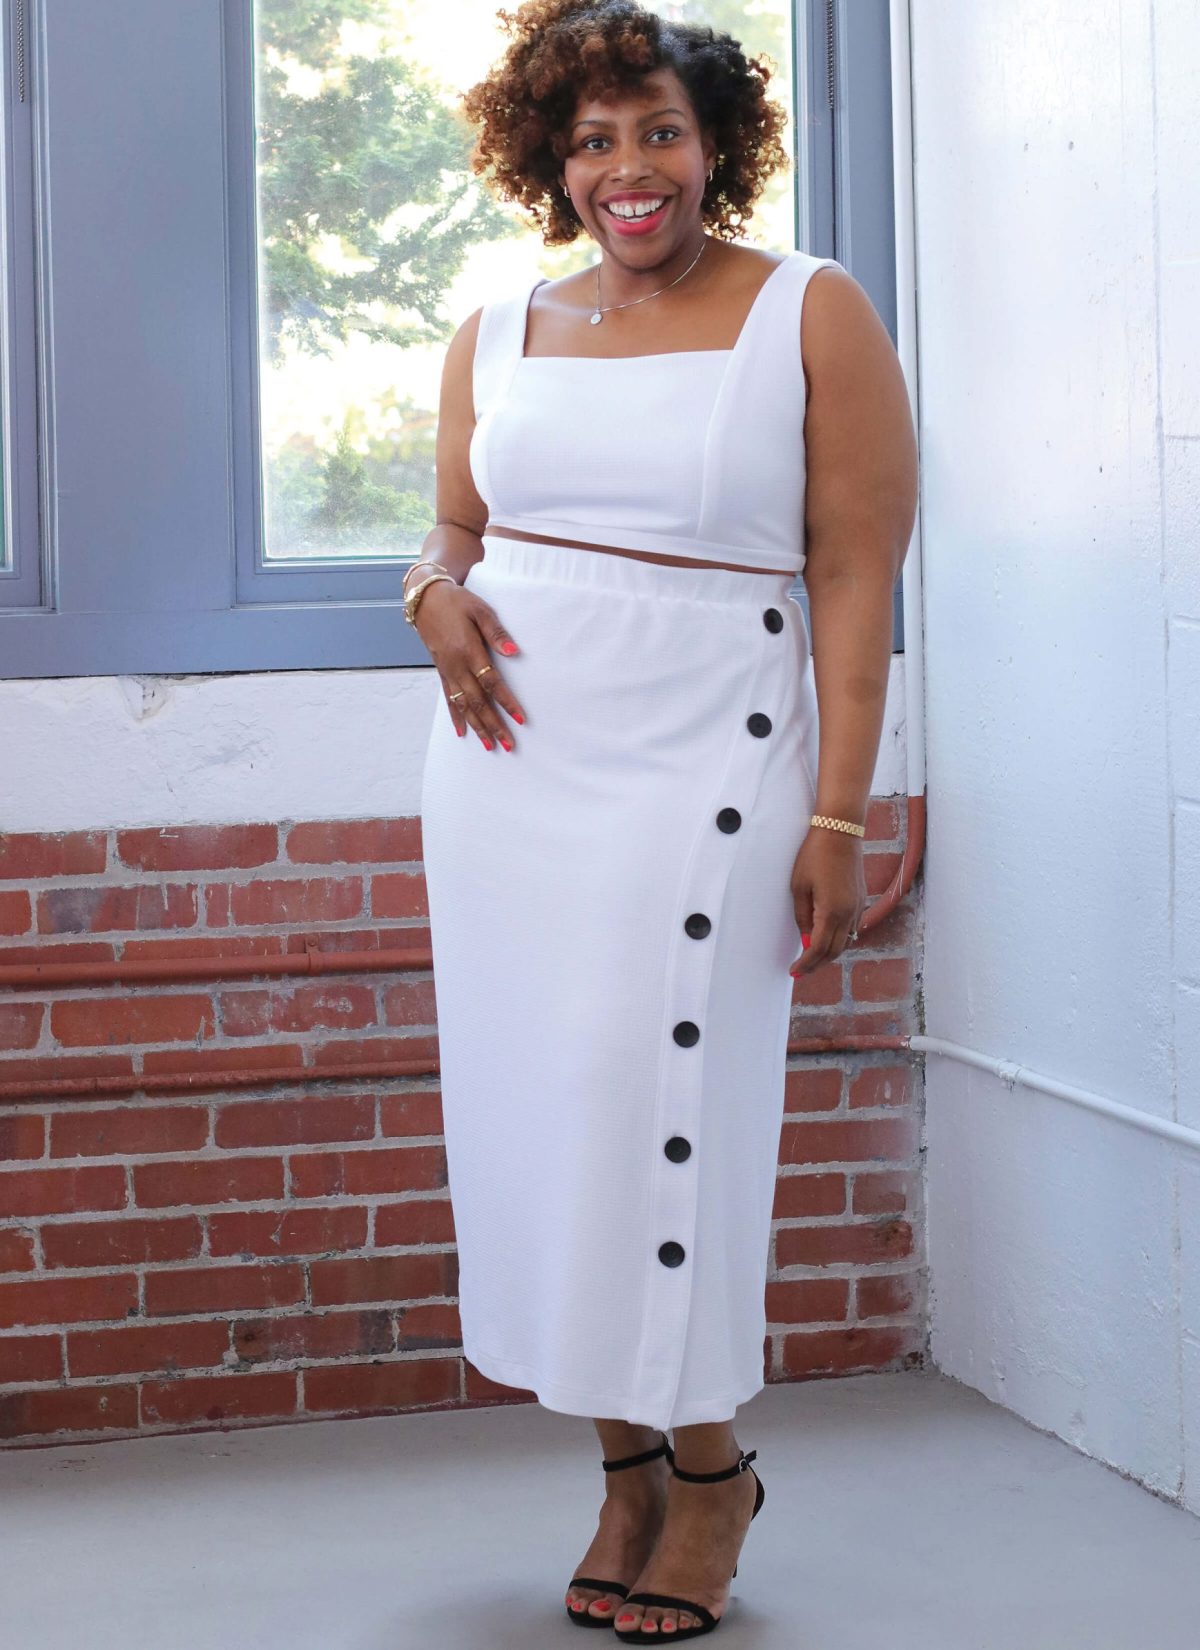 Know Me Sewing Pattern ME2013 Misses' and Women's Knit Tops and Skirts by Brittany J. Jones